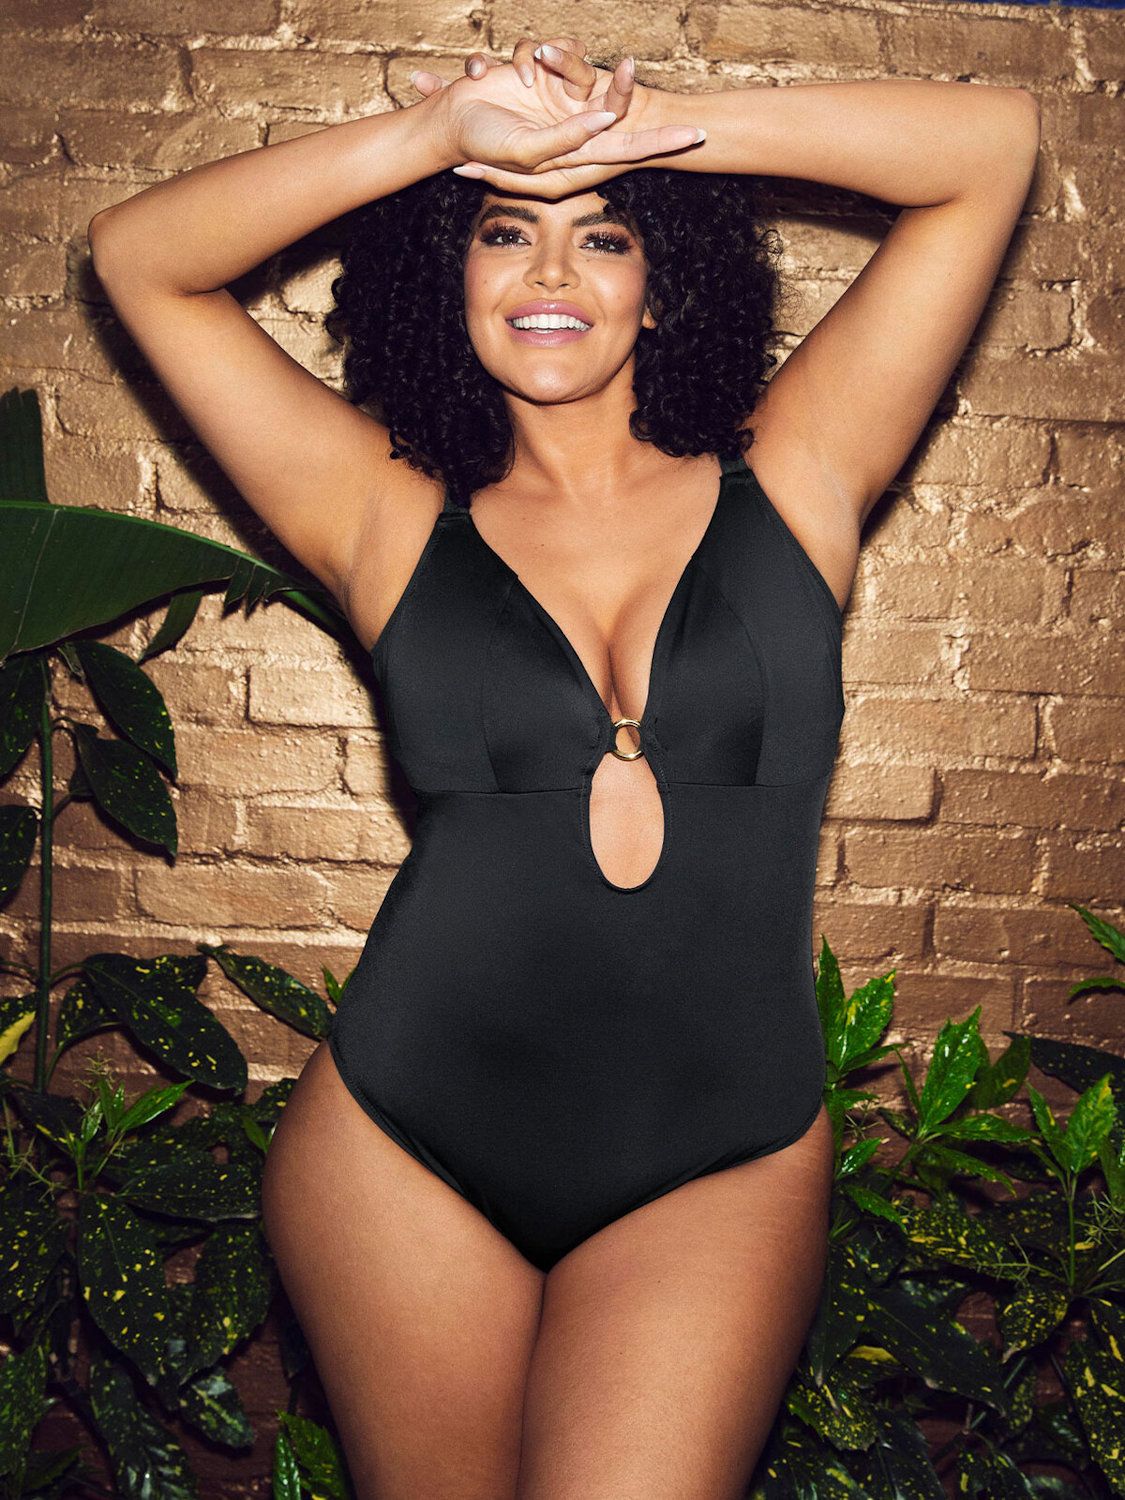 Elomi Bazaruto Plunge Non Wire One Piece Swimsuit (ES800643),36F,Black at   Women's Clothing store